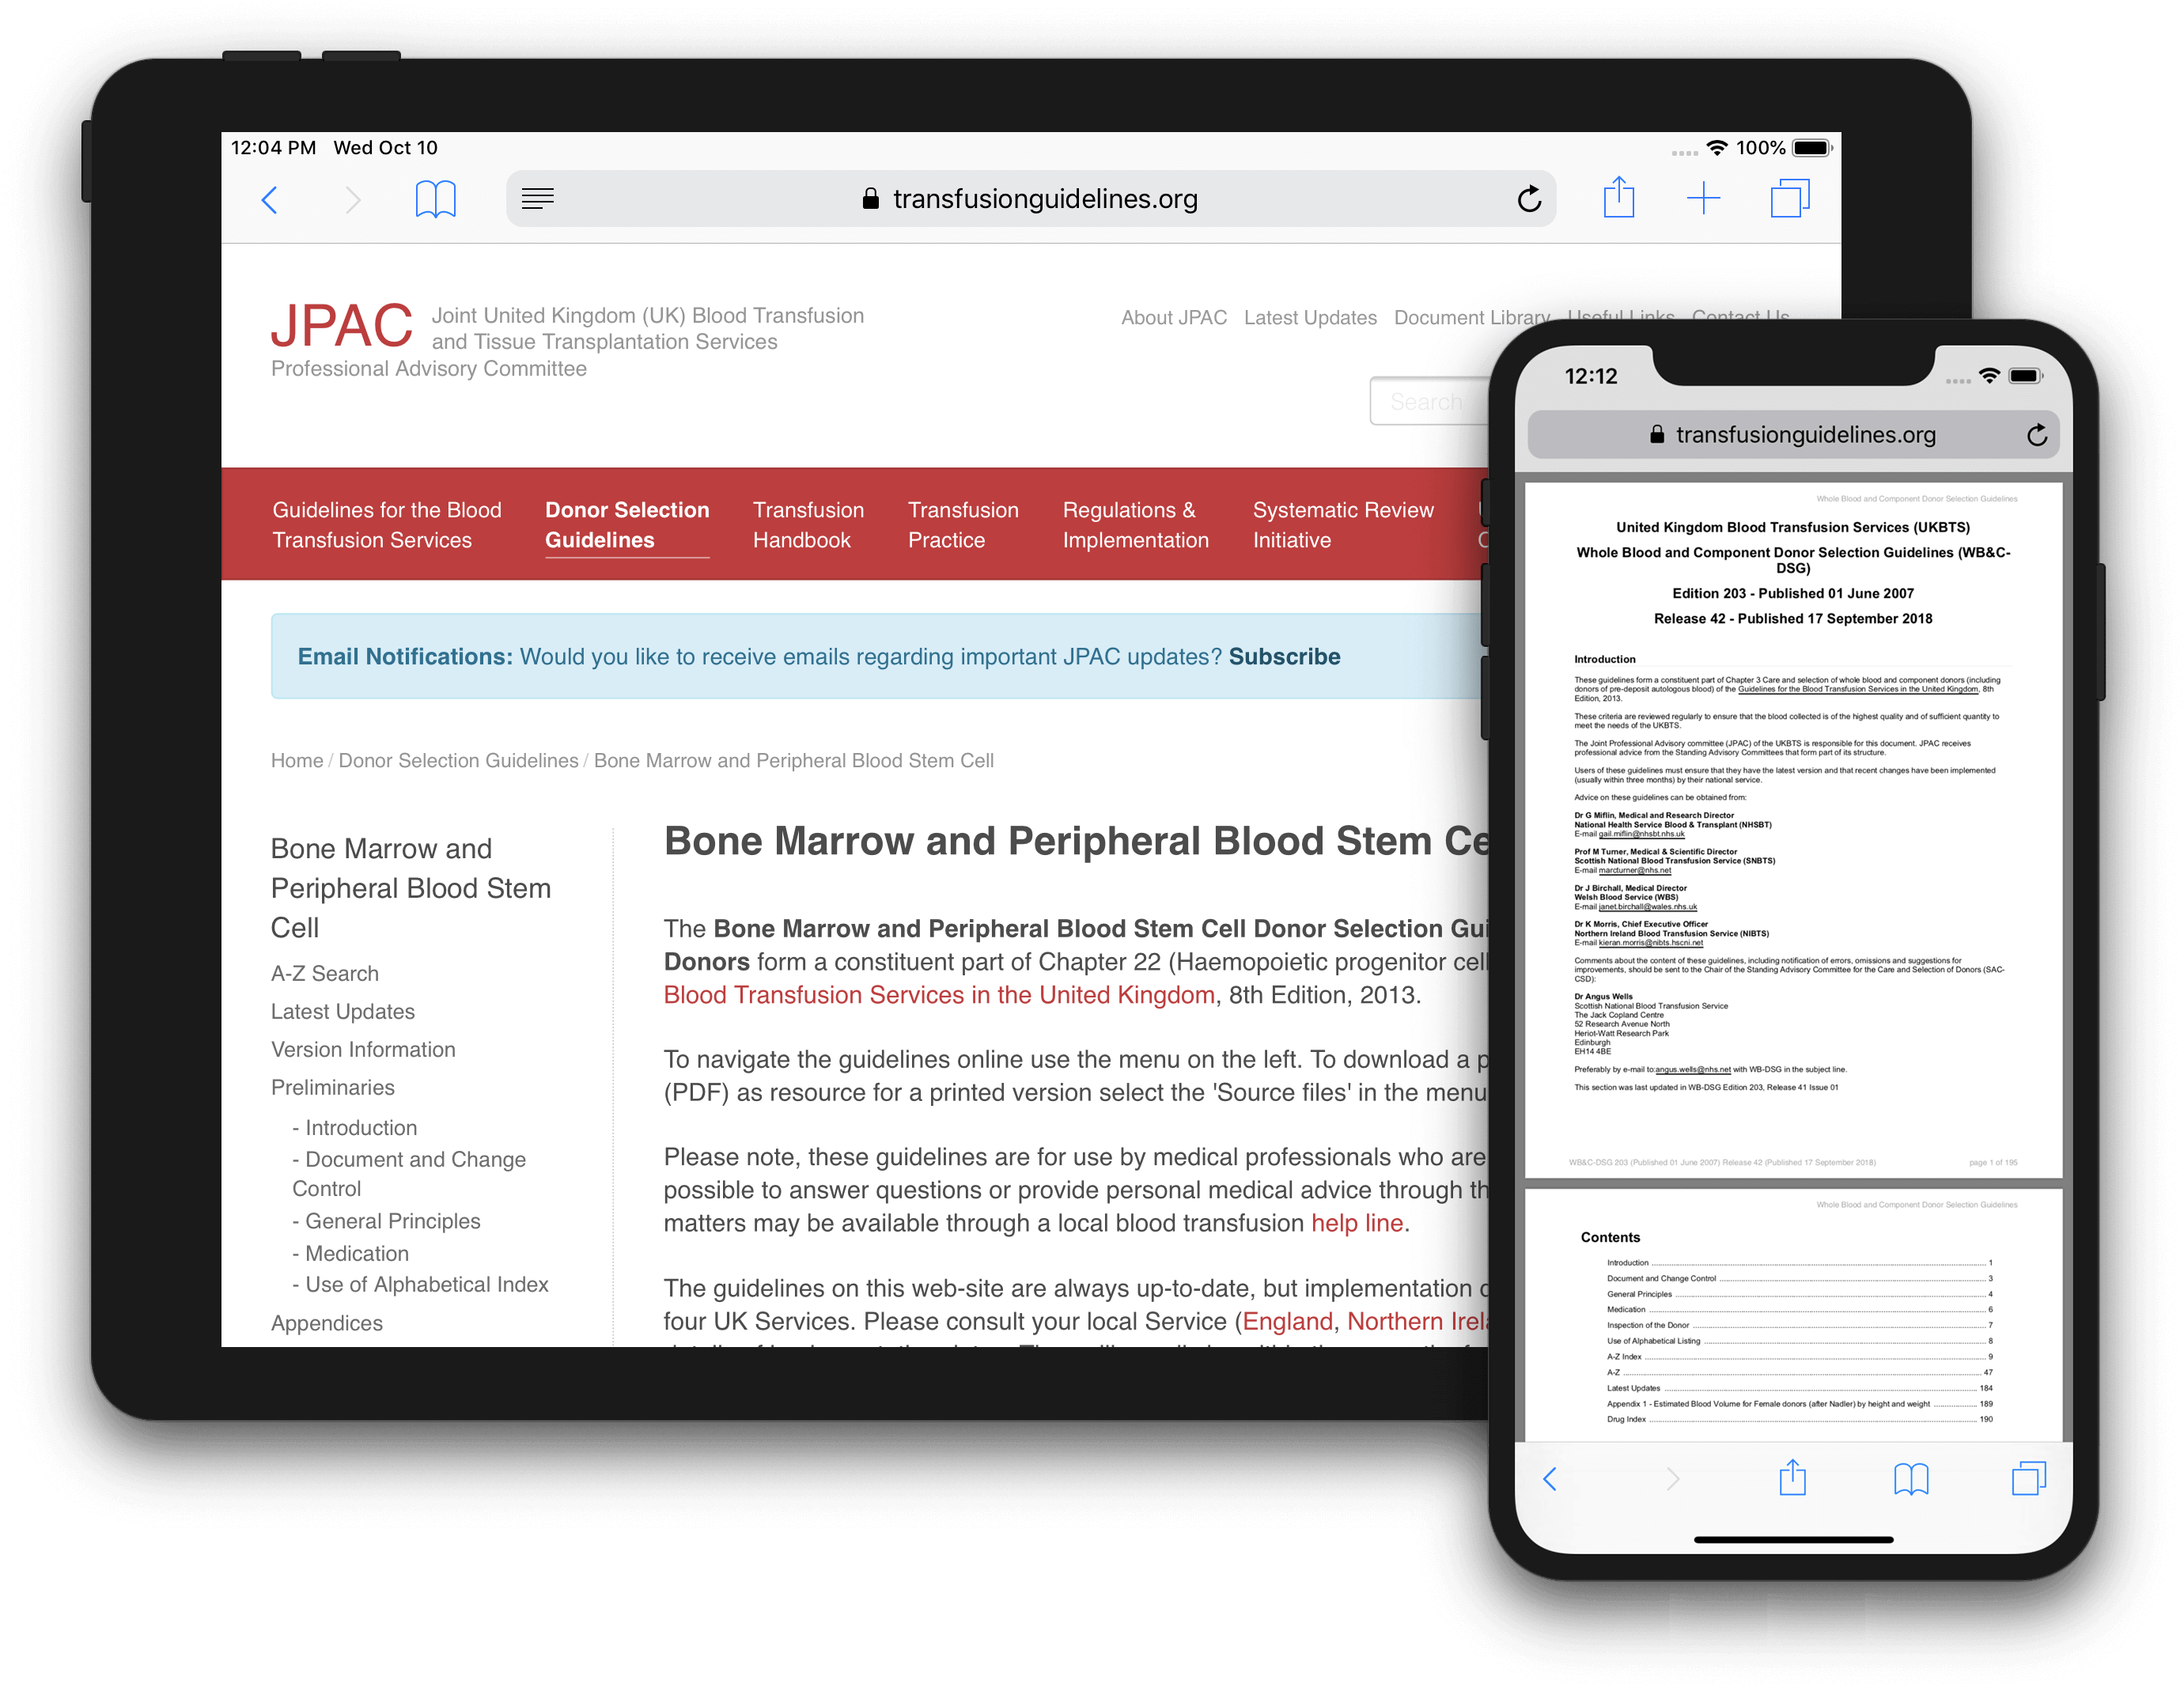 Joint United Kingdom Blood Transfusion and Tissue Transplantation Services Professional Advisory Committee website shown on mobile and desktop